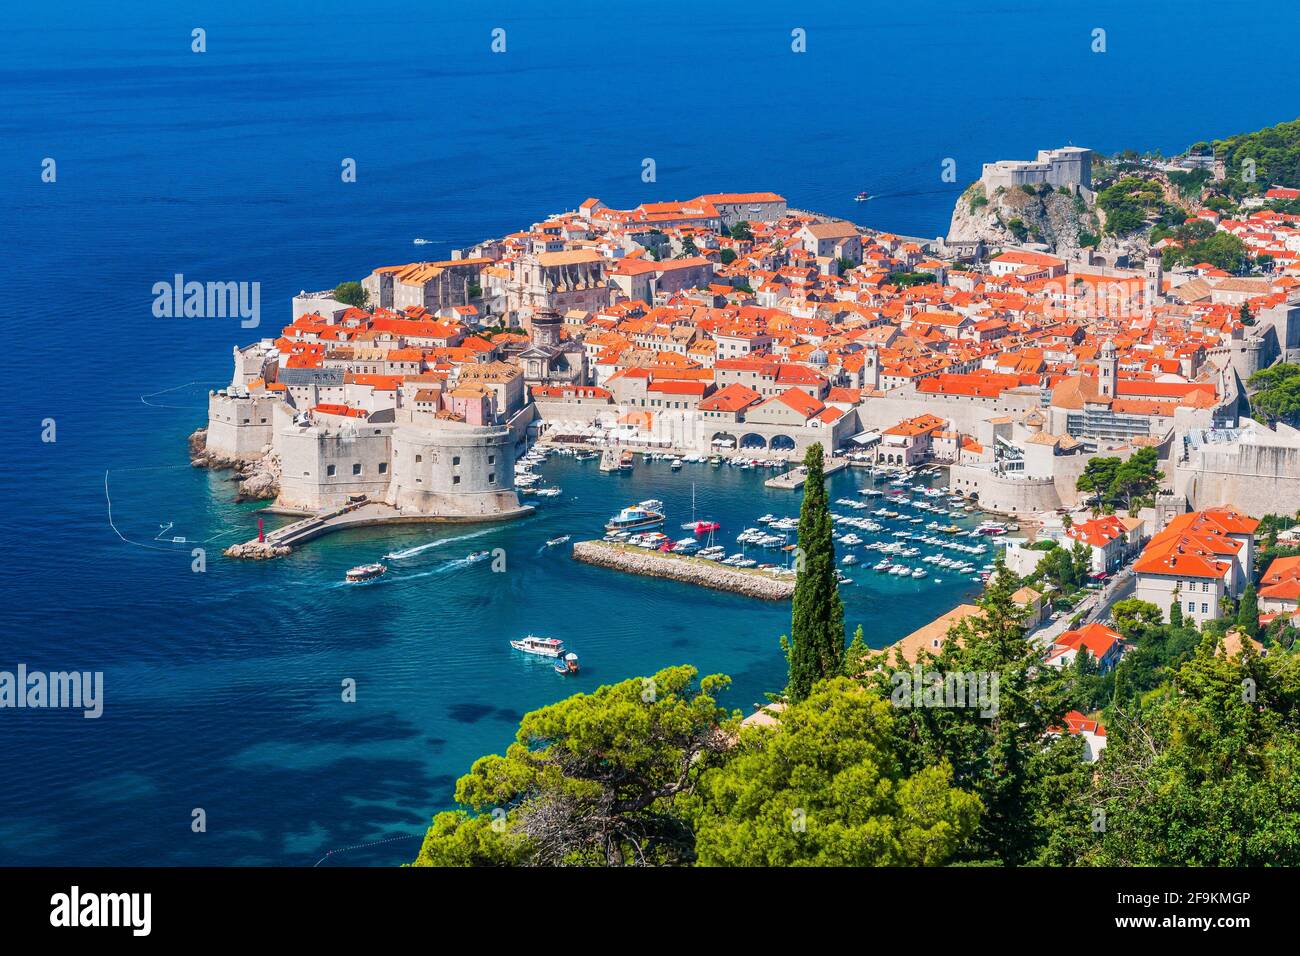 Dubrovnik, Croatia. Panoramic view of the walled city. Stock Photo